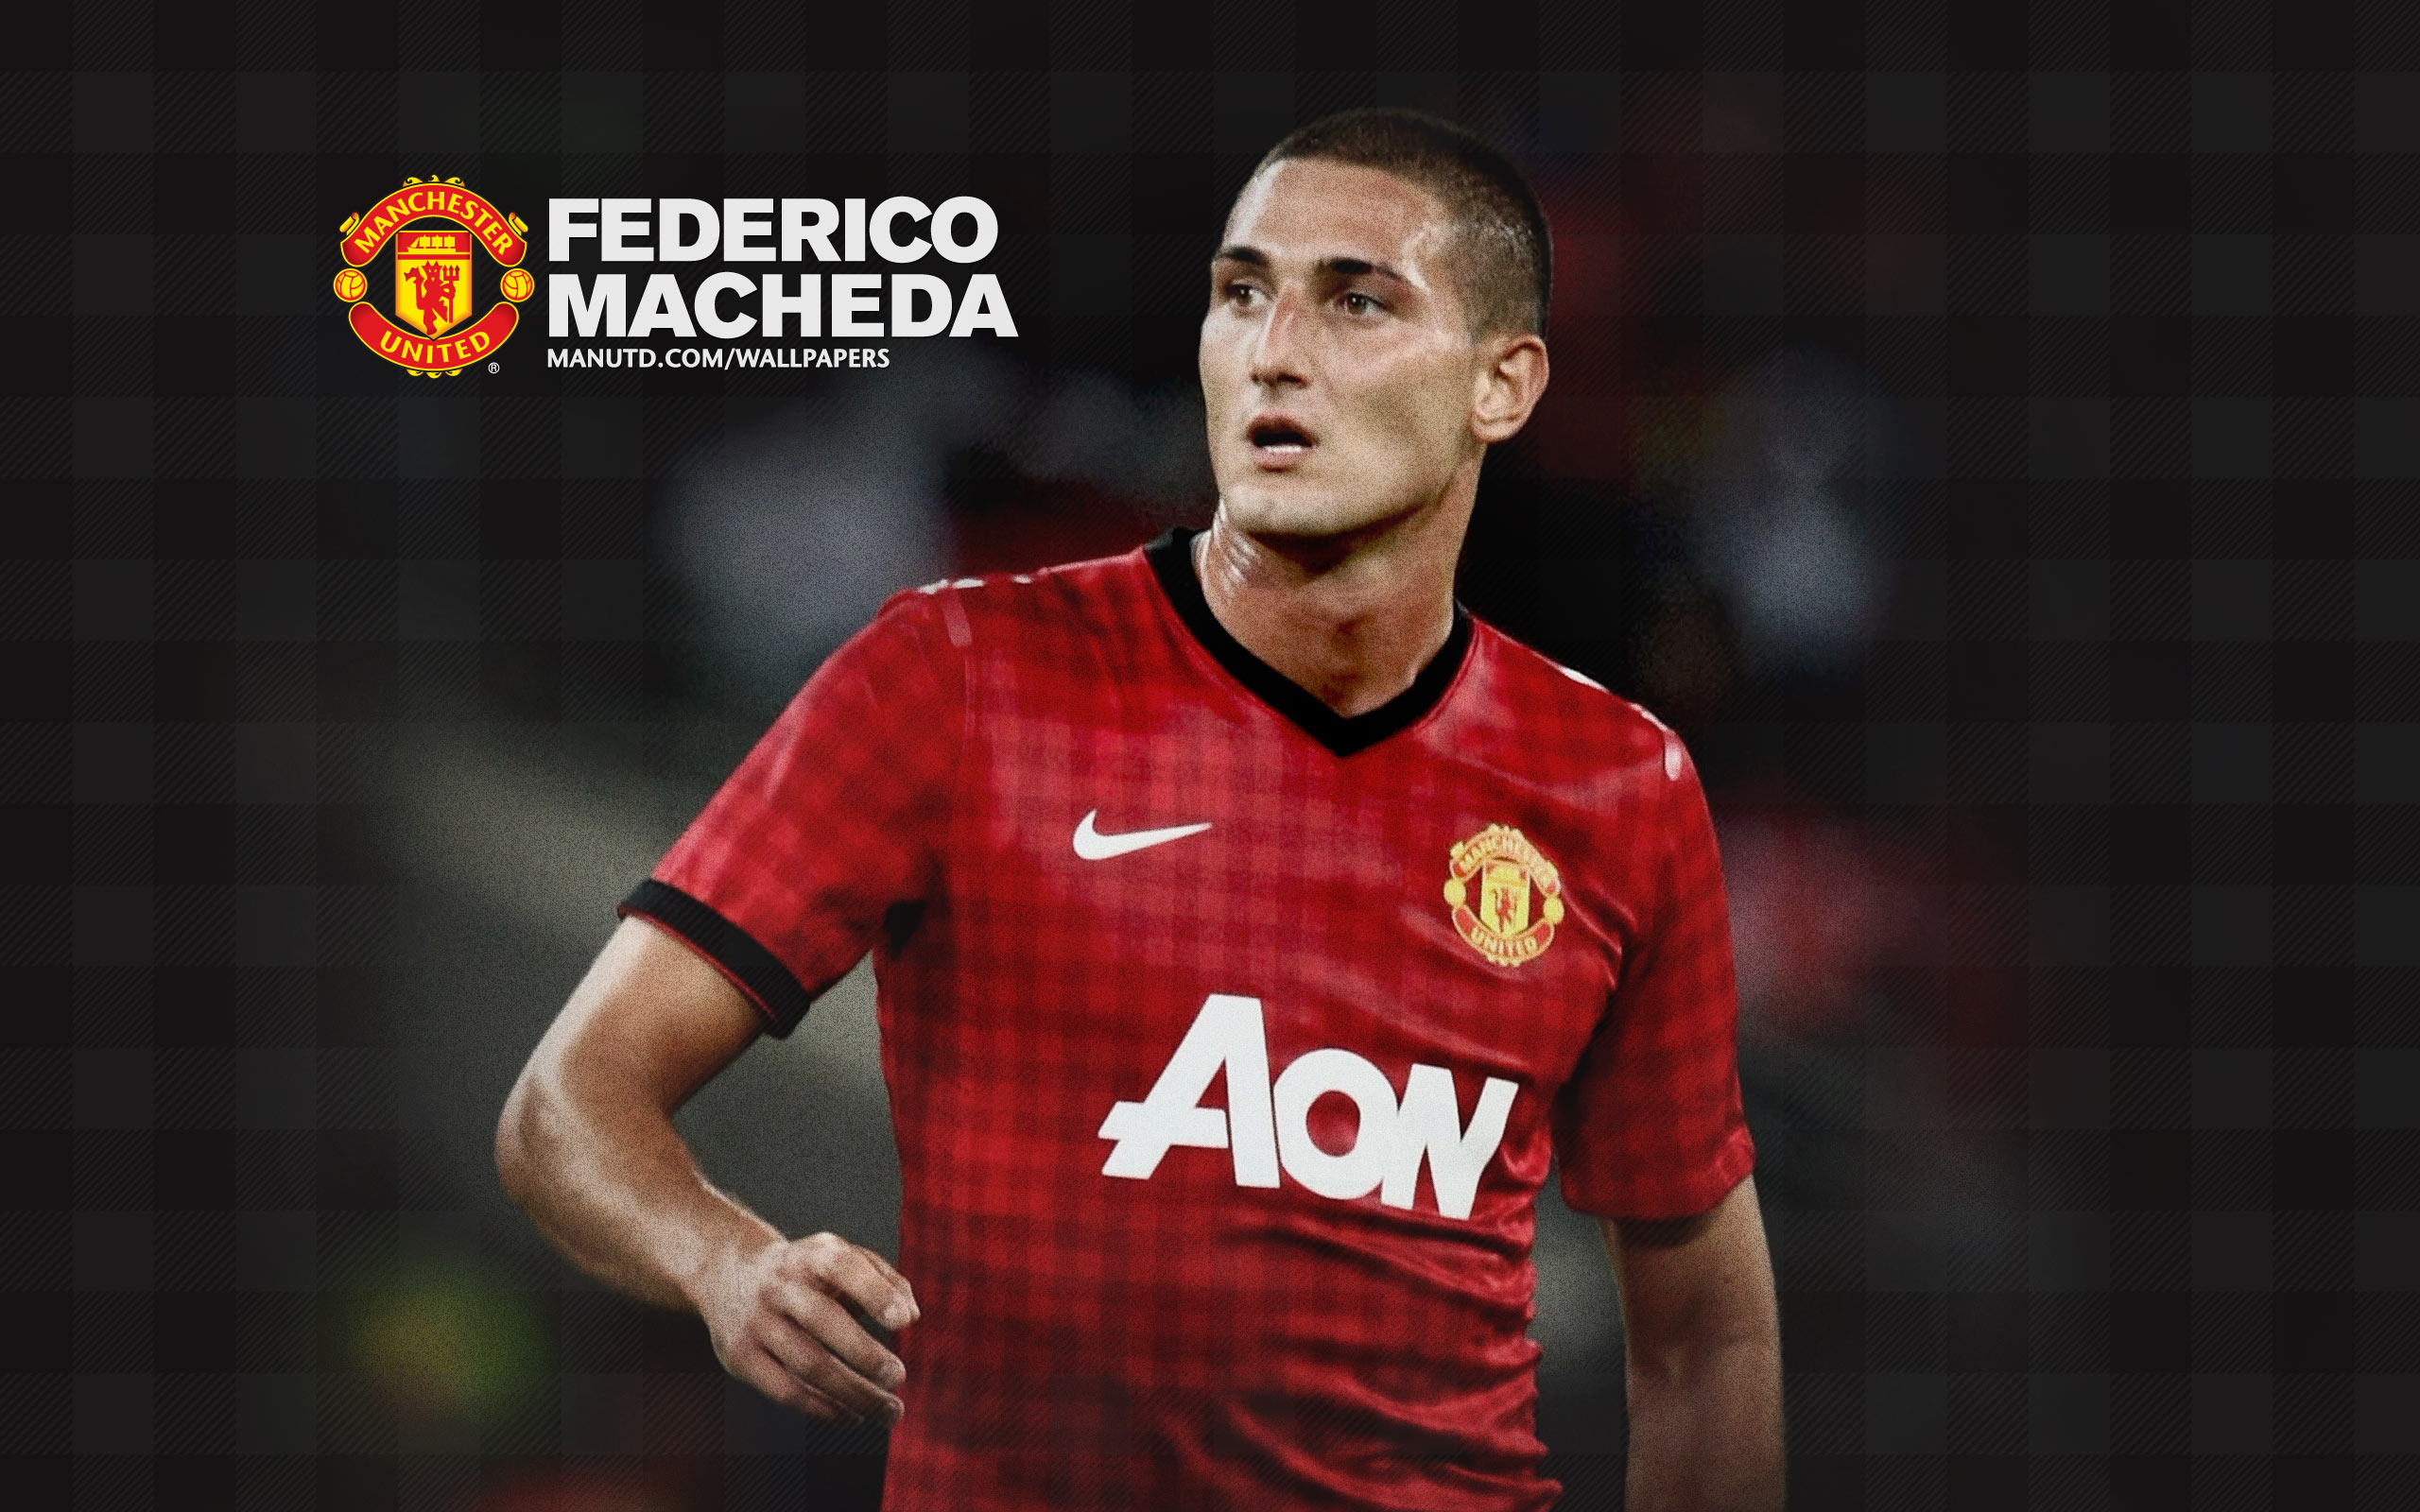 Manchester United Players Wallpaper 20122013 27 Federico Macheda